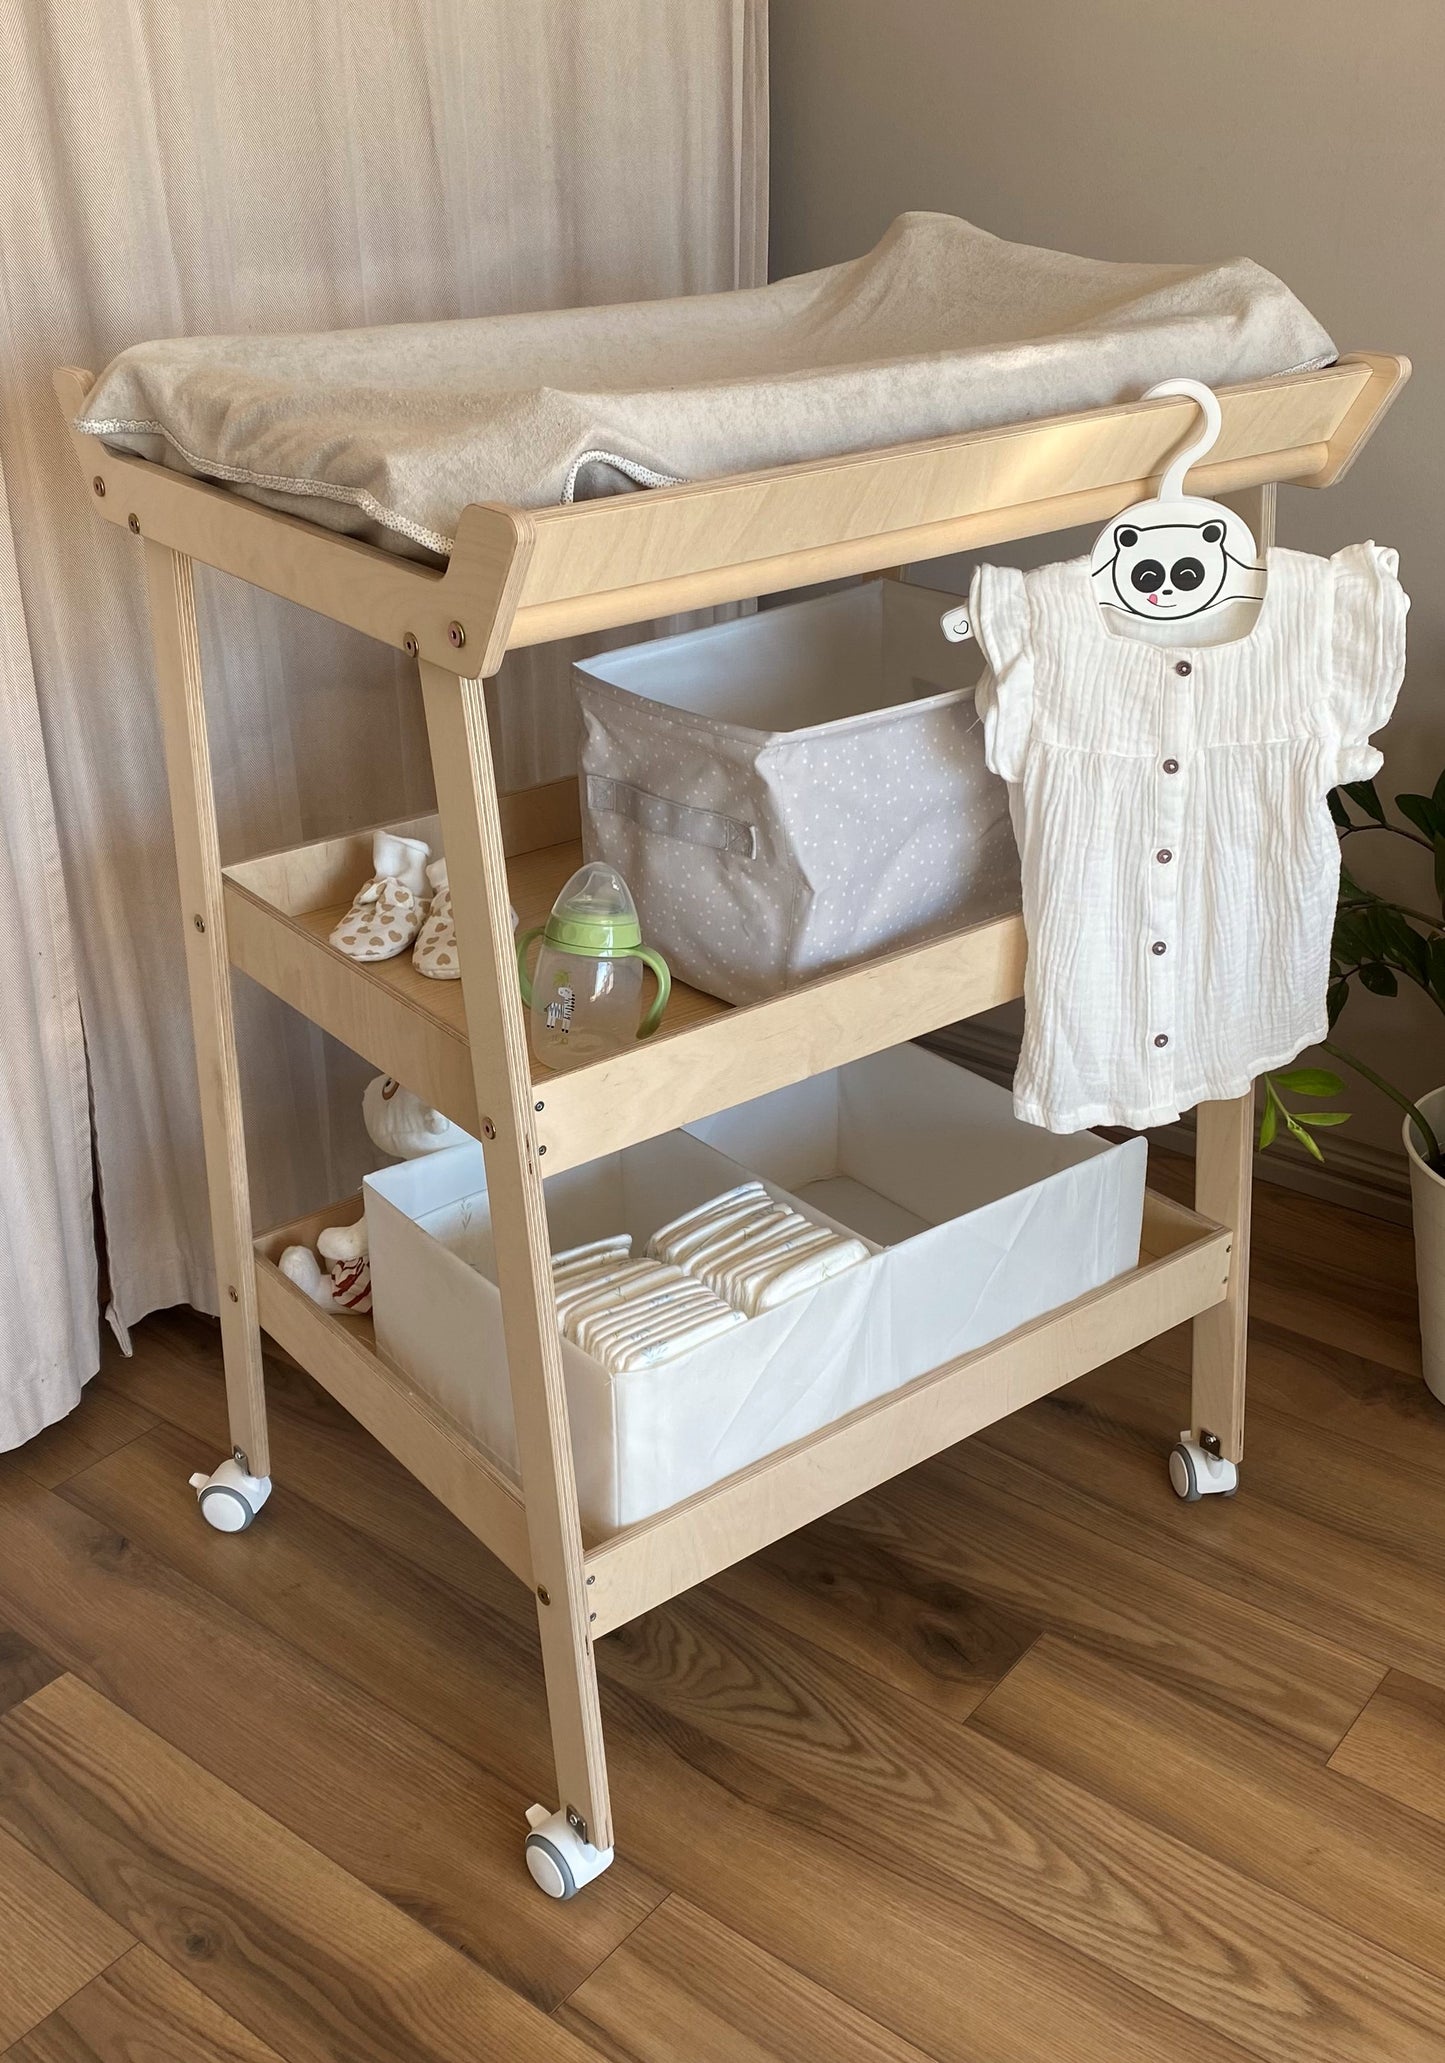 Changing Baby Table - AKACIS STORE